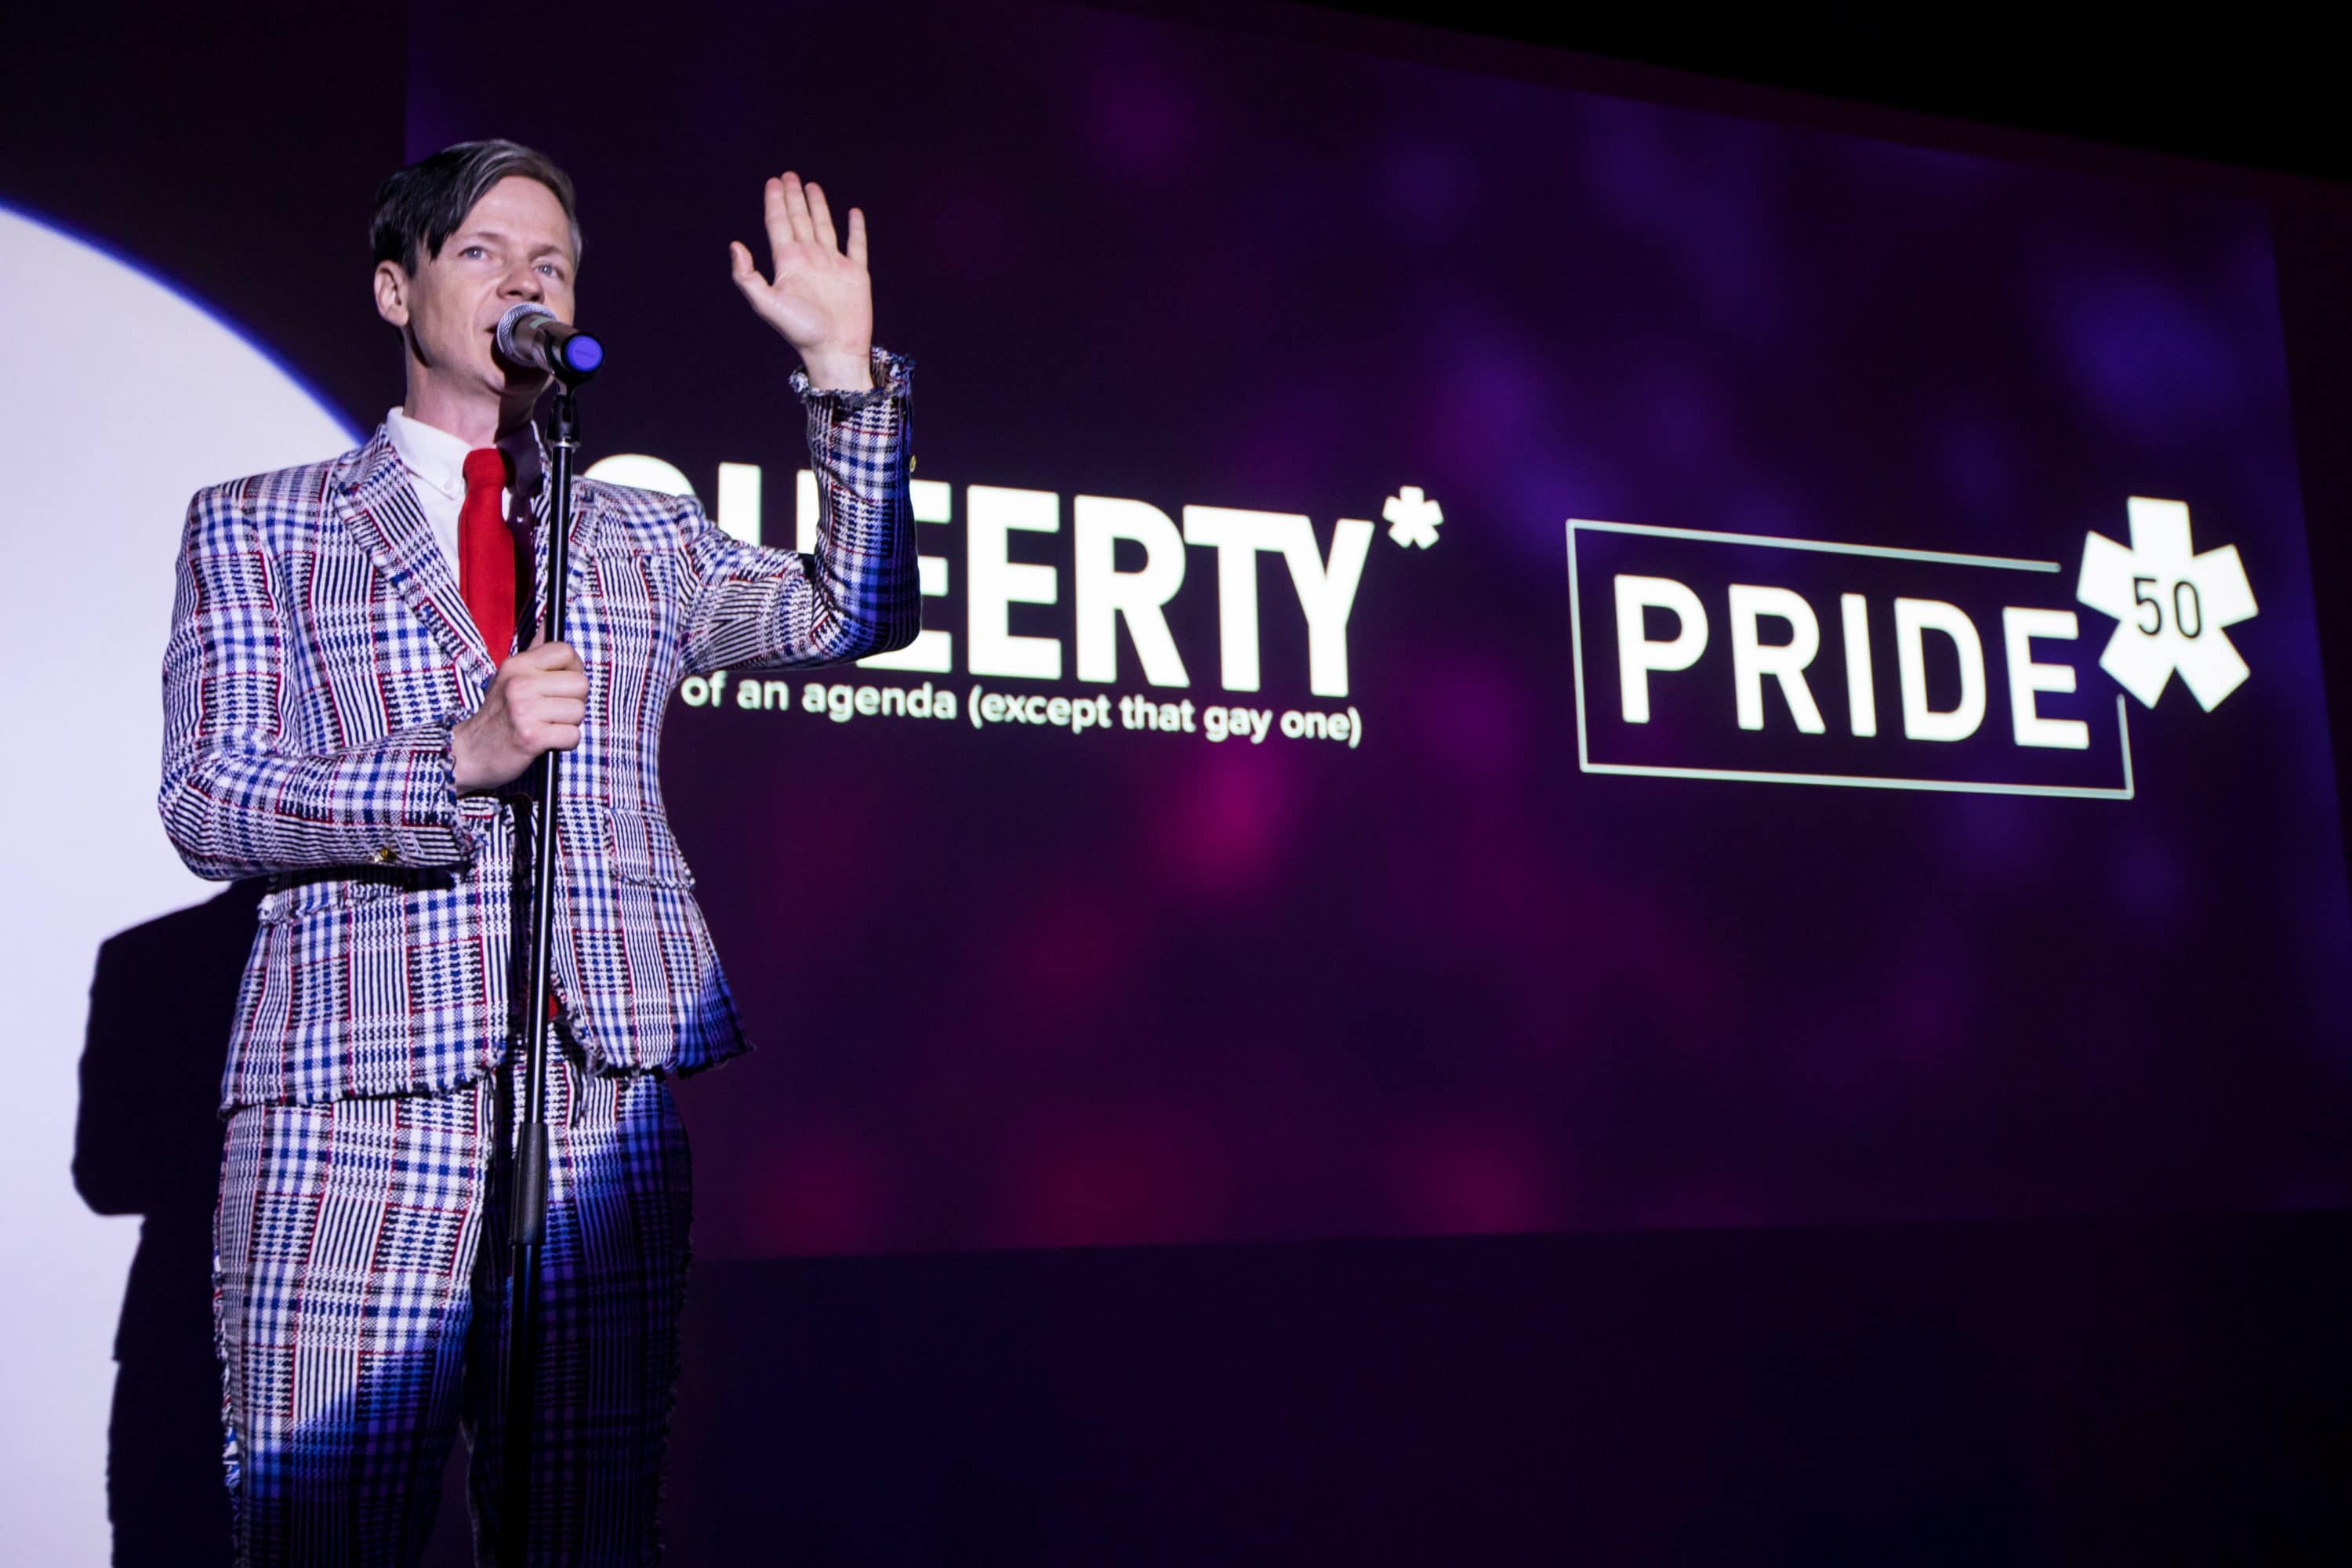 PHOTOS Highlights from the Queerty Pride50 extravaganza Meaws Gay